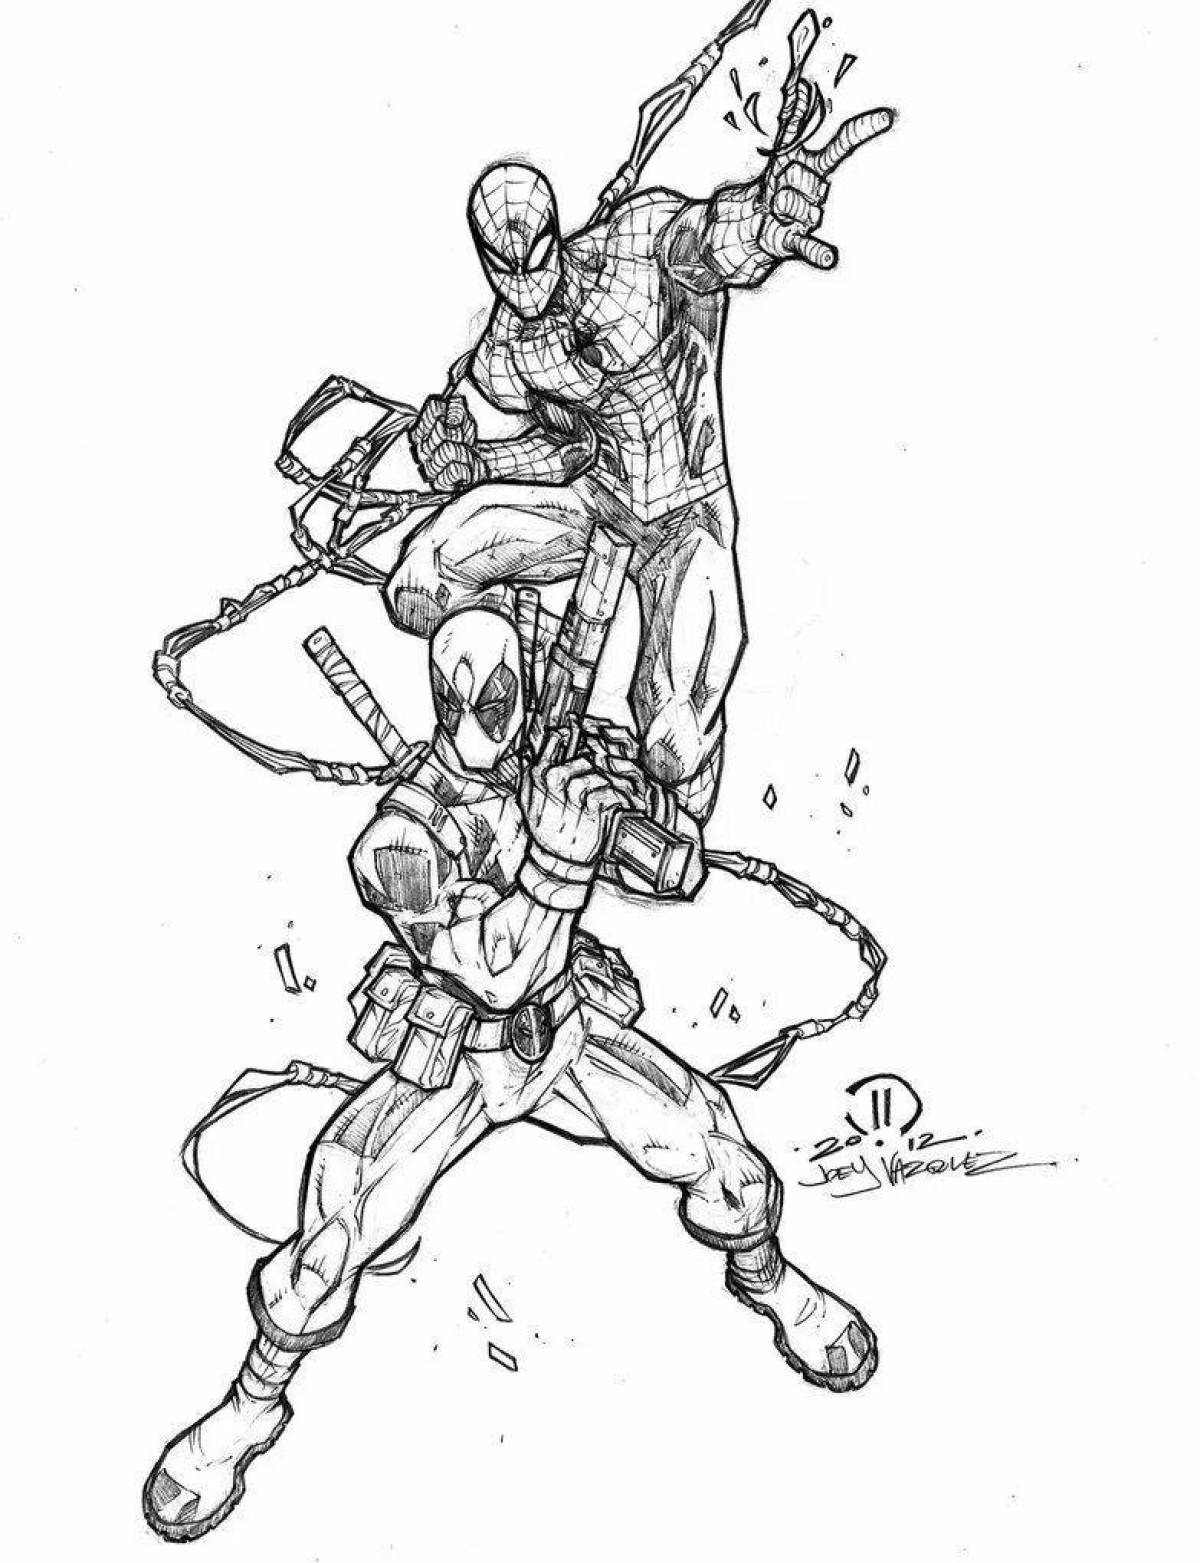 Marvelous deadpool and spiderman coloring pages for kids